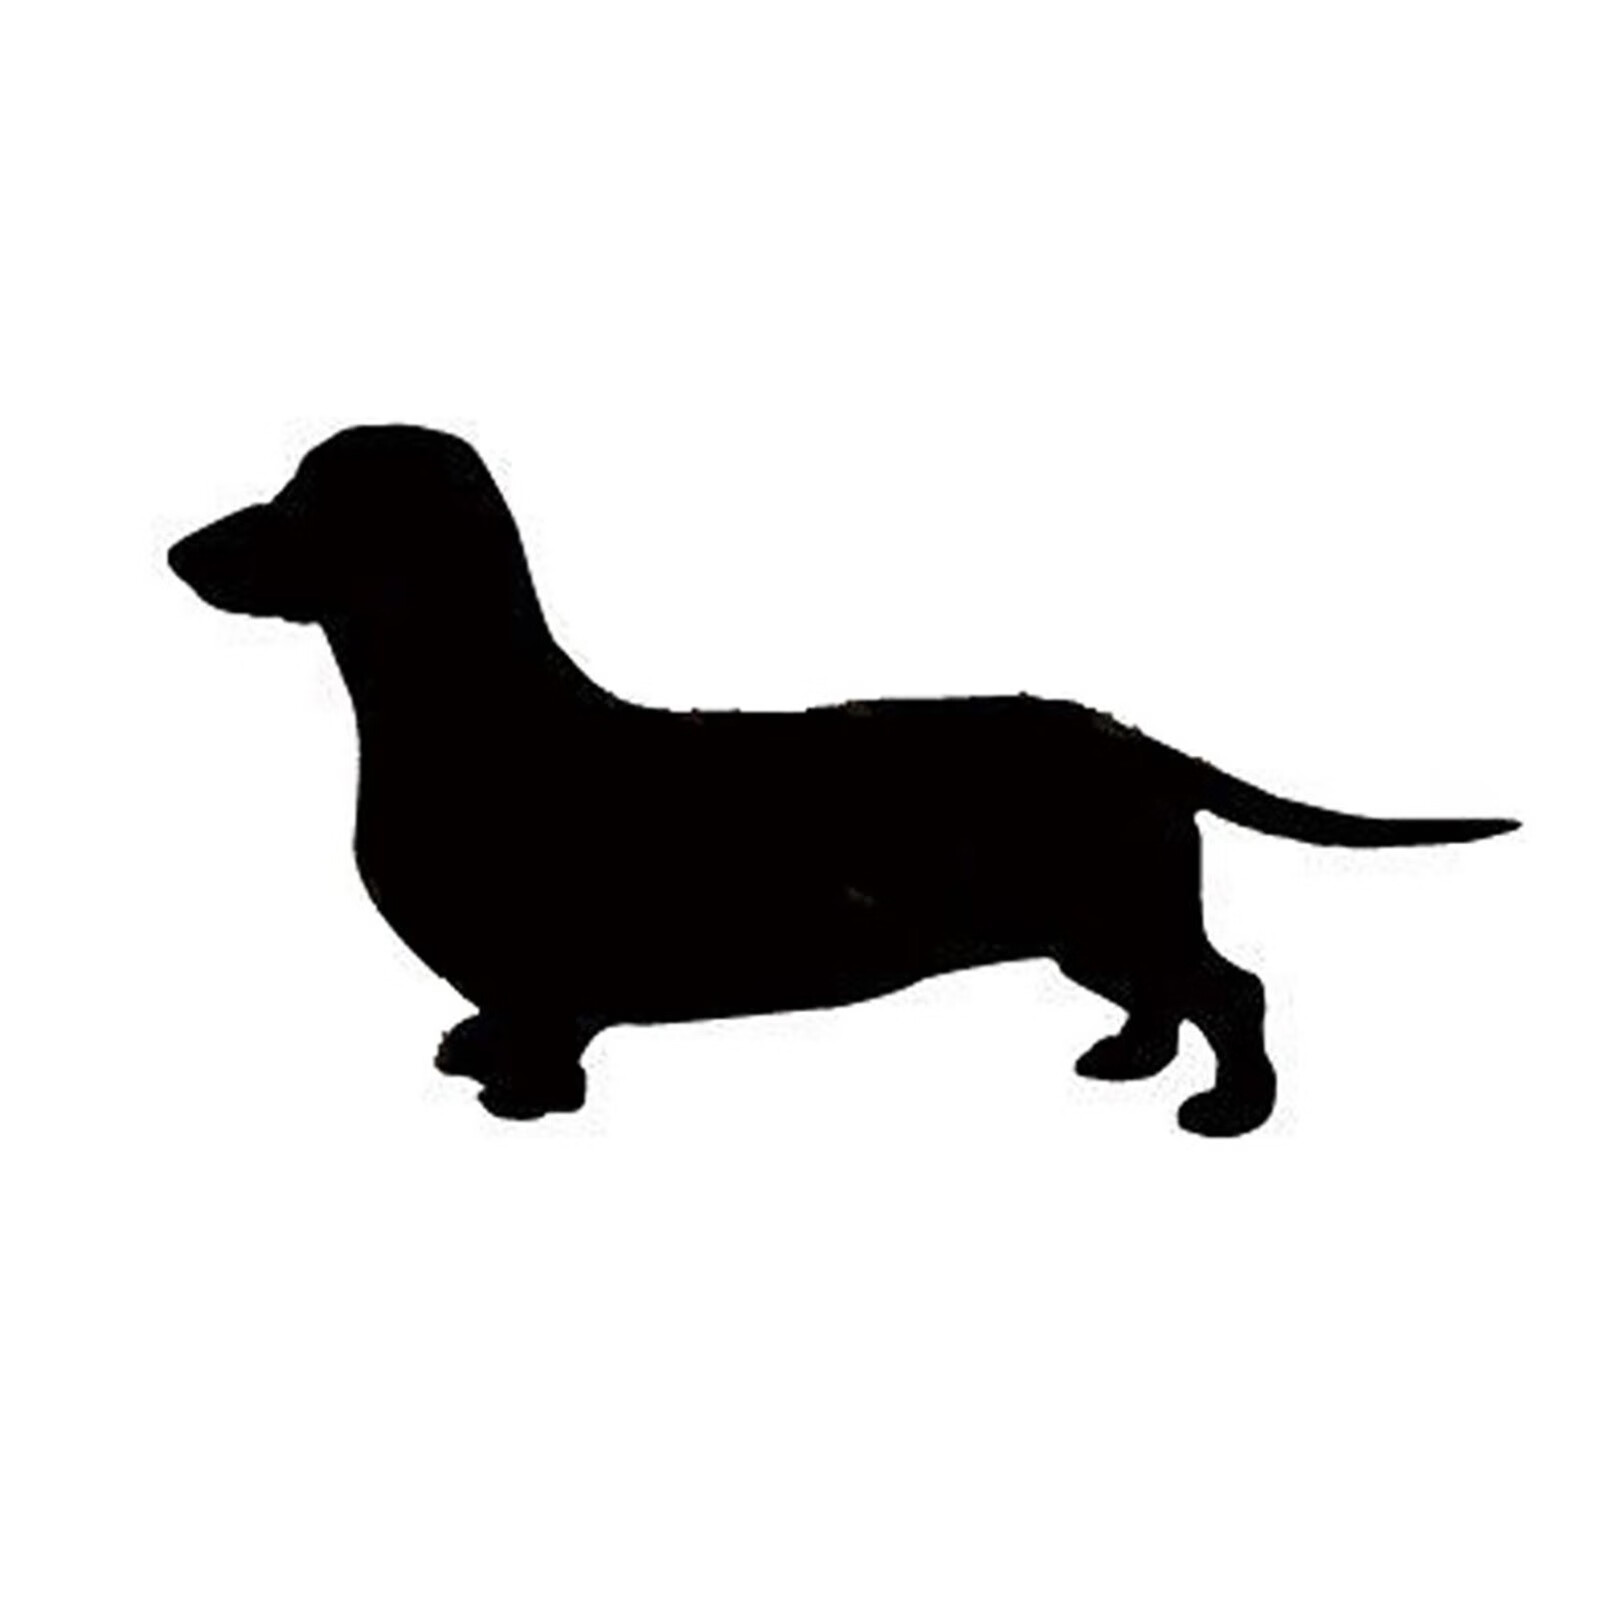 WOCLEILIY Dog Car Stickers Dachshunds Personality Fun Mobile Phone Stickers Computer Stickers Cup Stickers Body Stickers Animal D - image 1 of 6